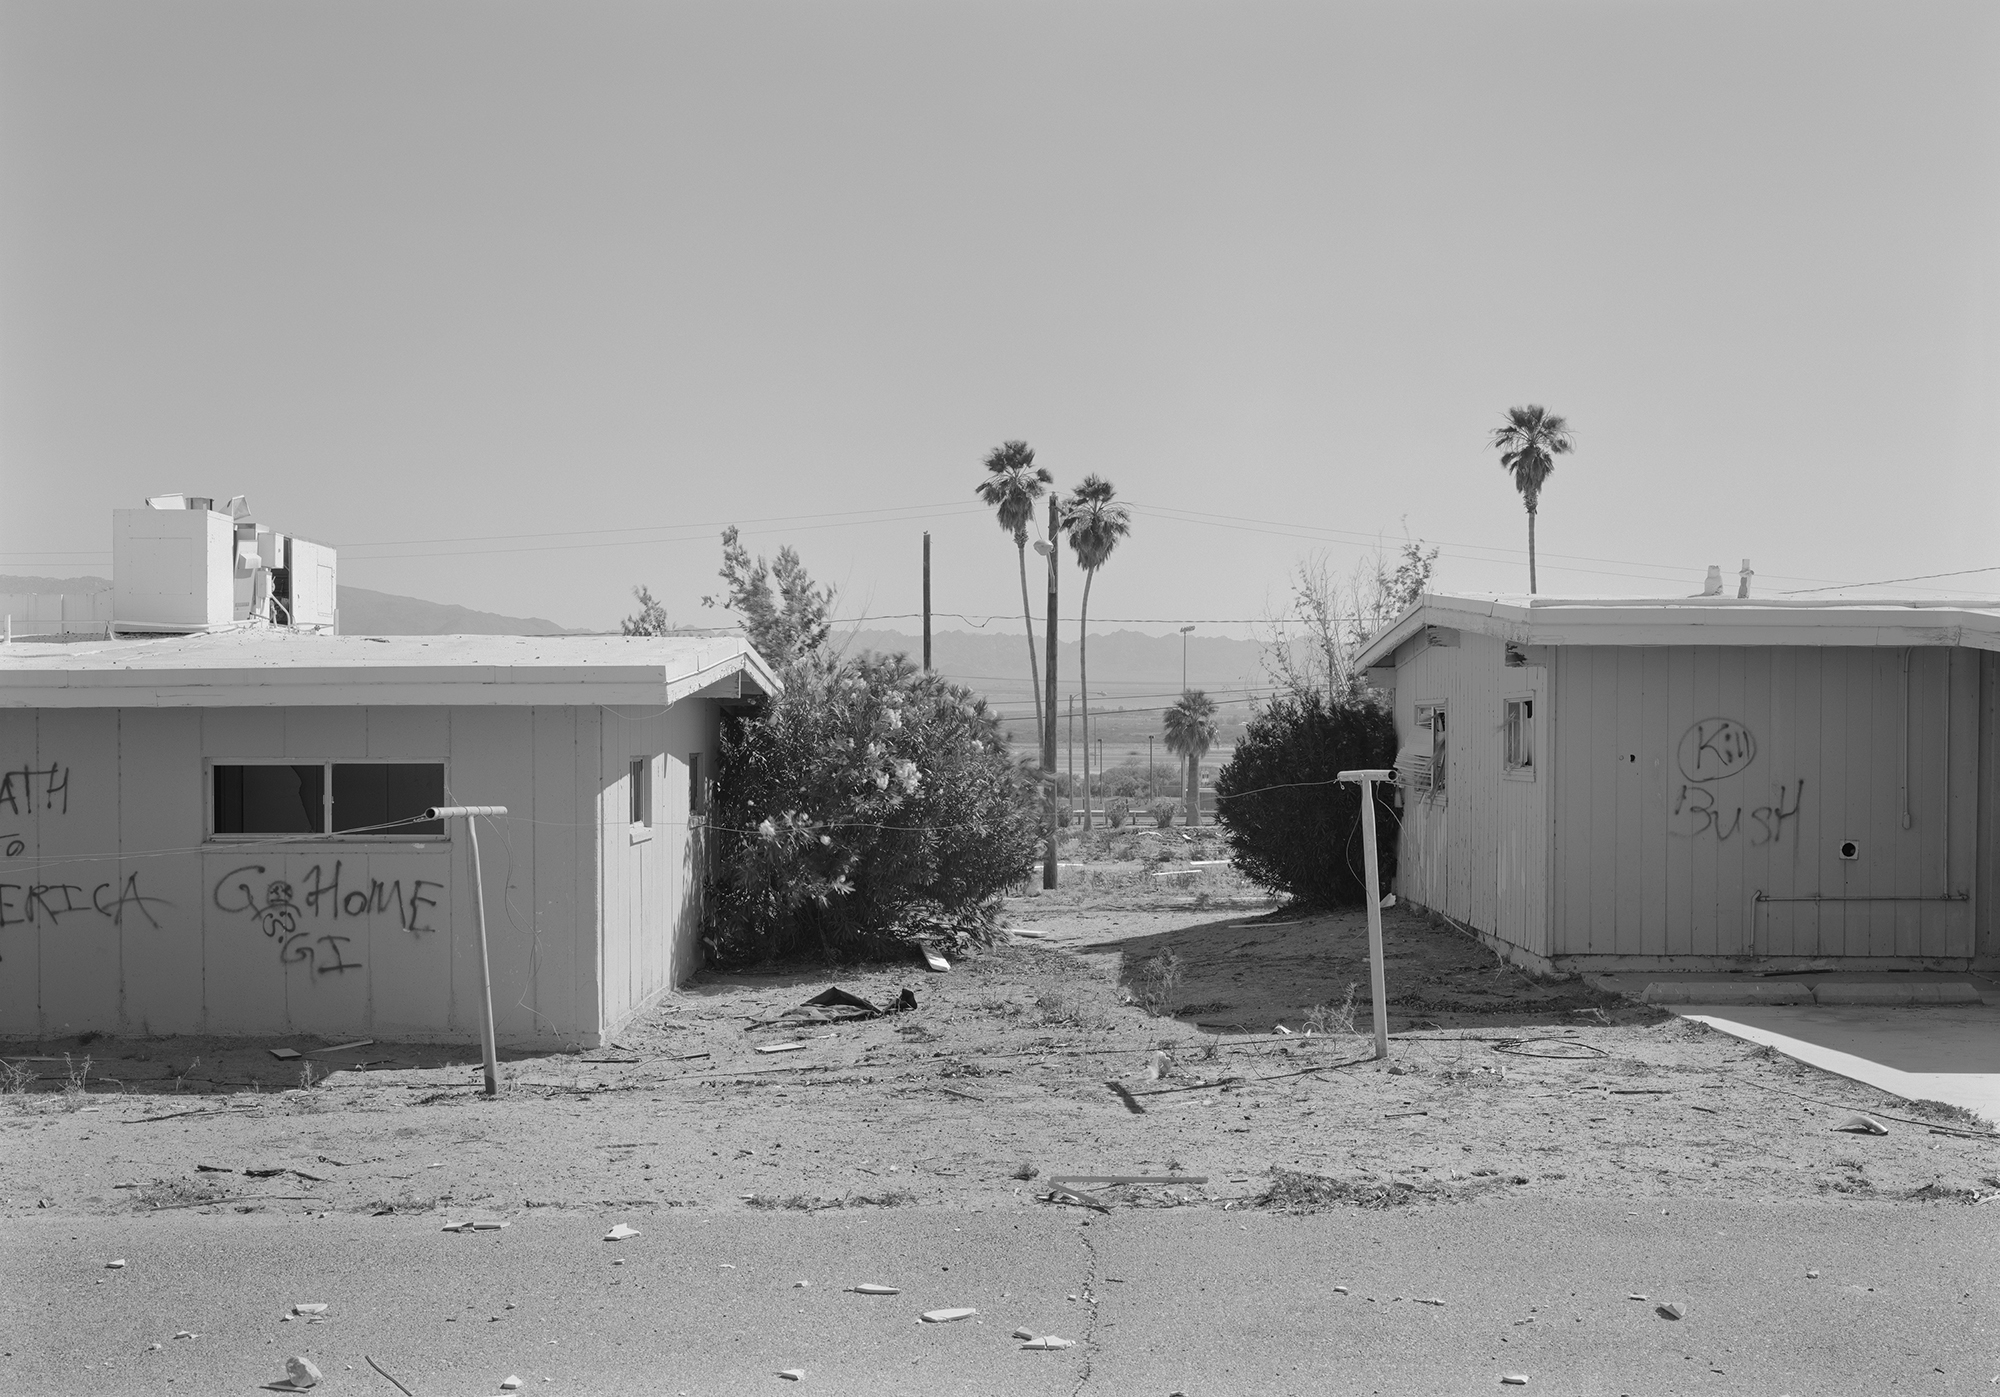 Security and Stabilization Operations, Graffiti II, from 29 Palms, 2003-2004